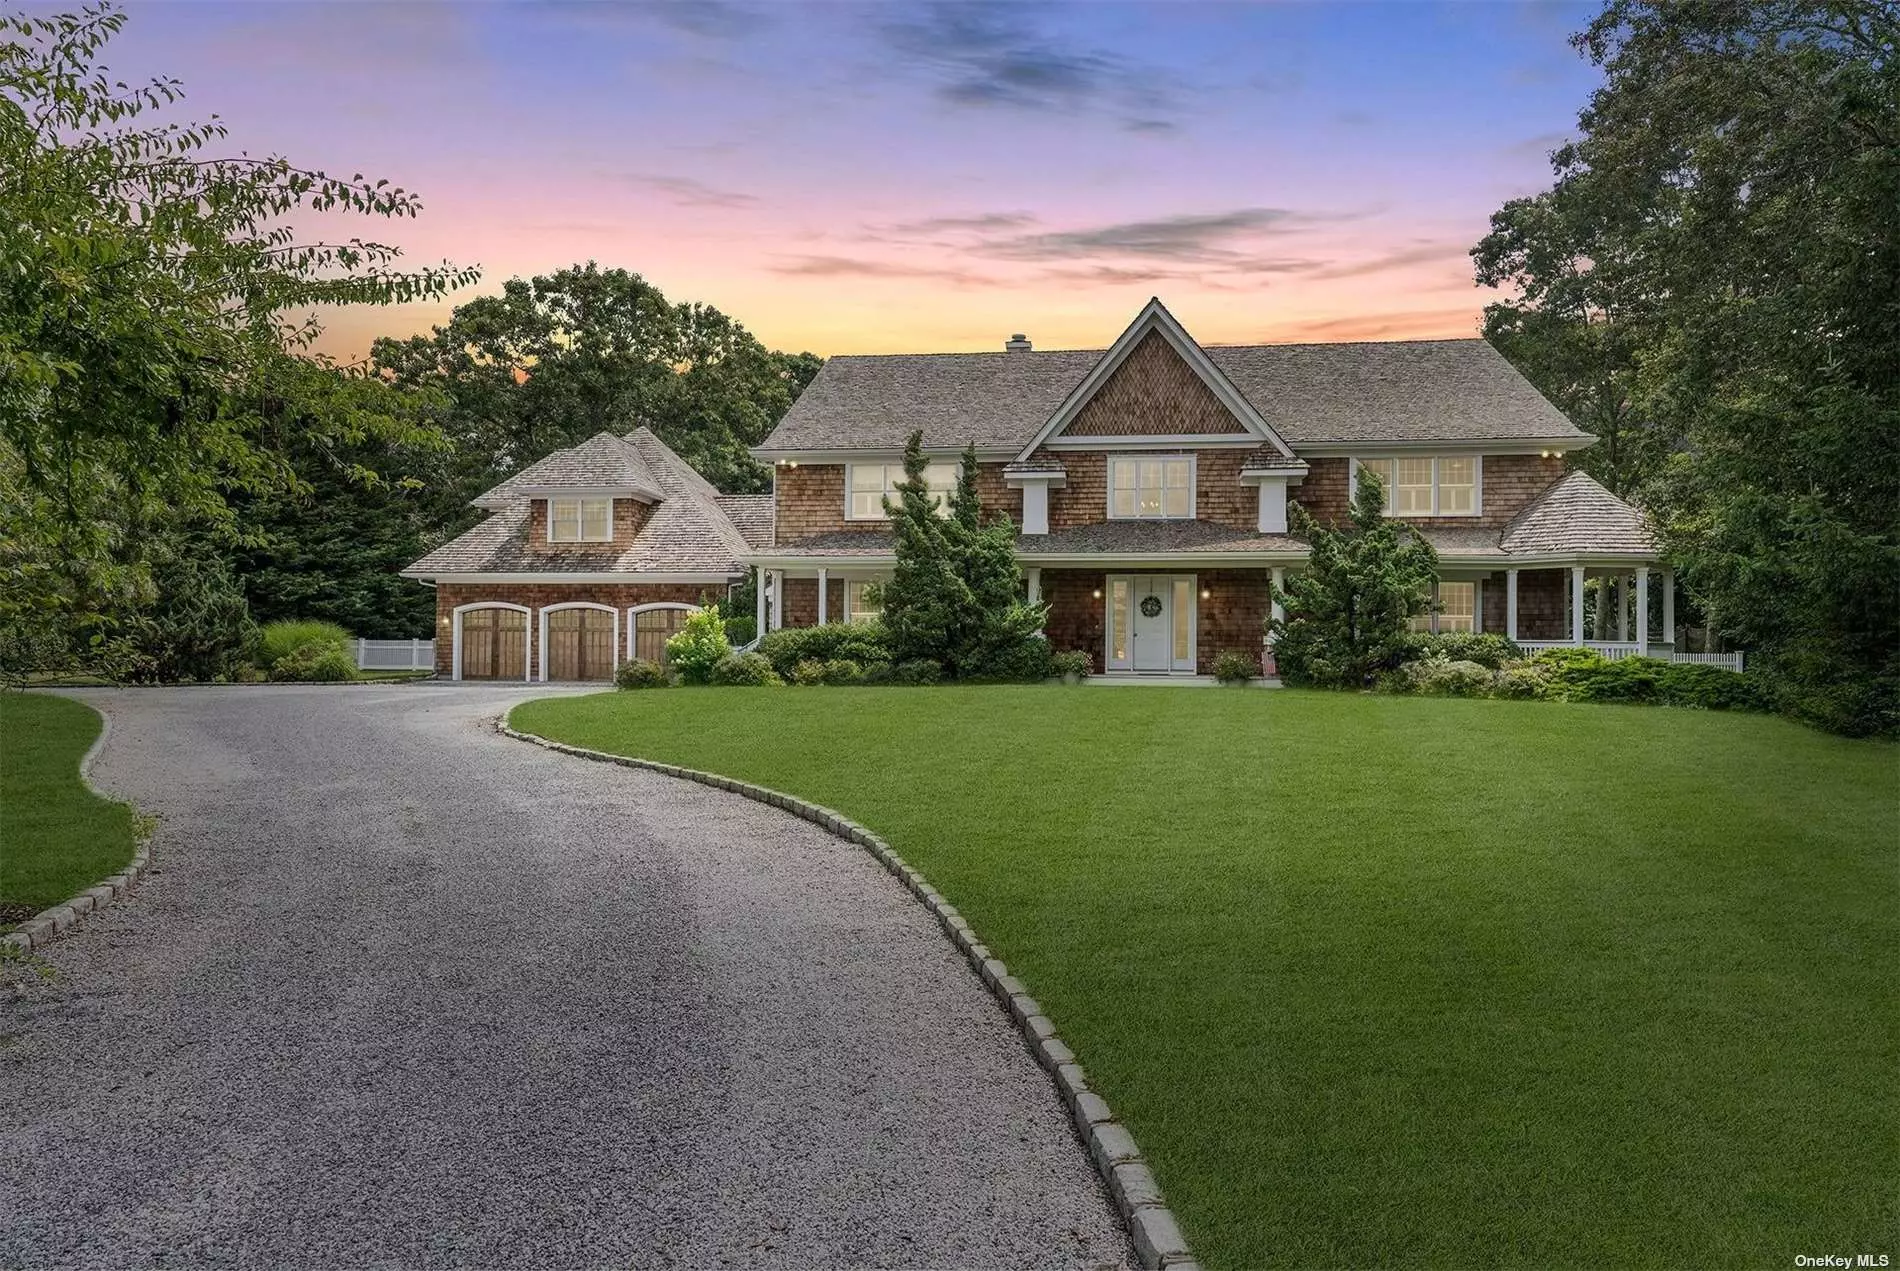 Located in the heart of Quogue South, this stunning generational estate sits on 1.7+/- acres in a cul-de-sac, off a private road. With over 7, 600+/- sf of elegantly appointed living space, the 30+/- ft tall entry provides a hint of the meticulous custom millwork throughout. The first floor features a living room with a fireplace and French doors which open to a spacious yard with a heated gunite pool, a classic brick patio, and ample room for tennis or pickleball. The main kitchen showcases an oversized granite center island, high-end appliances, and a dining-sized breakfast area in addition to a large, fully equipped catering kitchen. The grand scale of the first floor is complete with a second primary ensuite, a family room with a private covered lounge area, a half-bath that opens to the pool, a formal dining room with a fireplace, and a powder room. The massive second-floor primary suite has a private balcony, double walk-in closets, and a fireplace. The ensuite bath is framed with marble and features two vanity areas, a double steam shower, and a Jacuzzi. Three additional guest rooms, including one ensuite and two with a bath, plus a terrace and a laundry room complement the upstairs. Additional amenities include an entertainment room with a 16&rsquo; vaulted ceiling and a three-car garage.